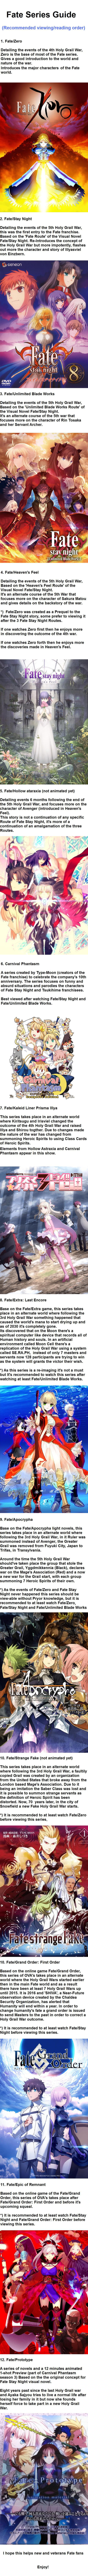 What is Fate Series and In What Order Do I Need to Watch It?